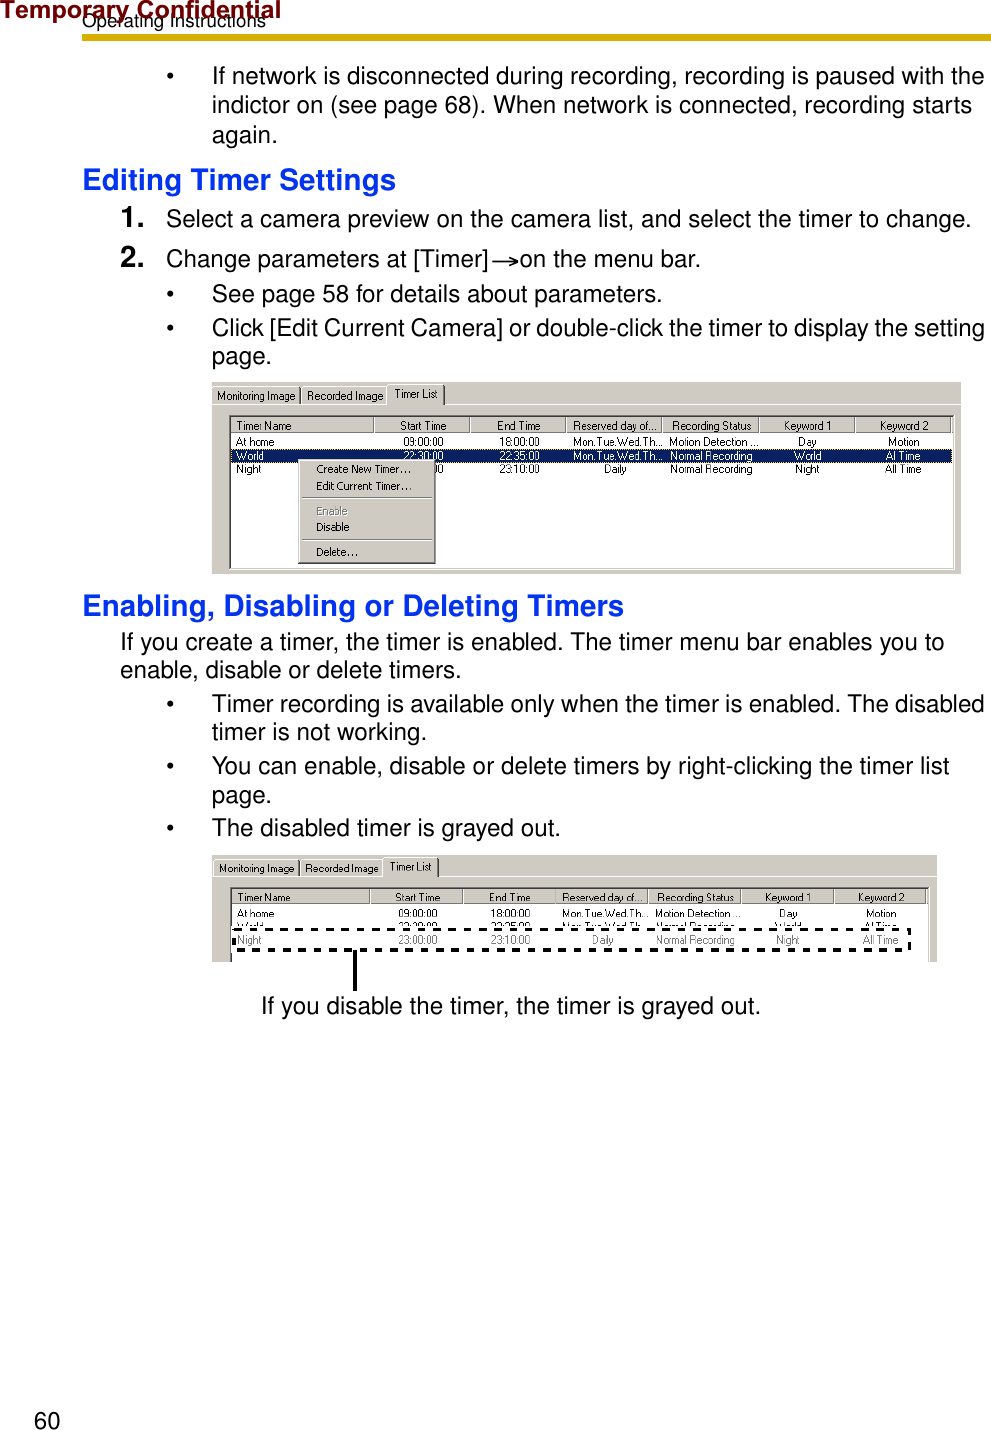 Operating Instructions60• If network is disconnected during recording, recording is paused with the indictor on (see page 68). When network is connected, recording starts again.Editing Timer Settings1. Select a camera preview on the camera list, and select the timer to change.2. Change parameters at [Timer] on the menu bar.• See page 58 for details about parameters.• Click [Edit Current Camera] or double-click the timer to display the setting page.Enabling, Disabling or Deleting TimersIf you create a timer, the timer is enabled. The timer menu bar enables you to enable, disable or delete timers.• Timer recording is available only when the timer is enabled. The disabled timer is not working.• You can enable, disable or delete timers by right-clicking the timer list page.• The disabled timer is grayed out.If you disable the timer, the timer is grayed out.Temporary Confidential